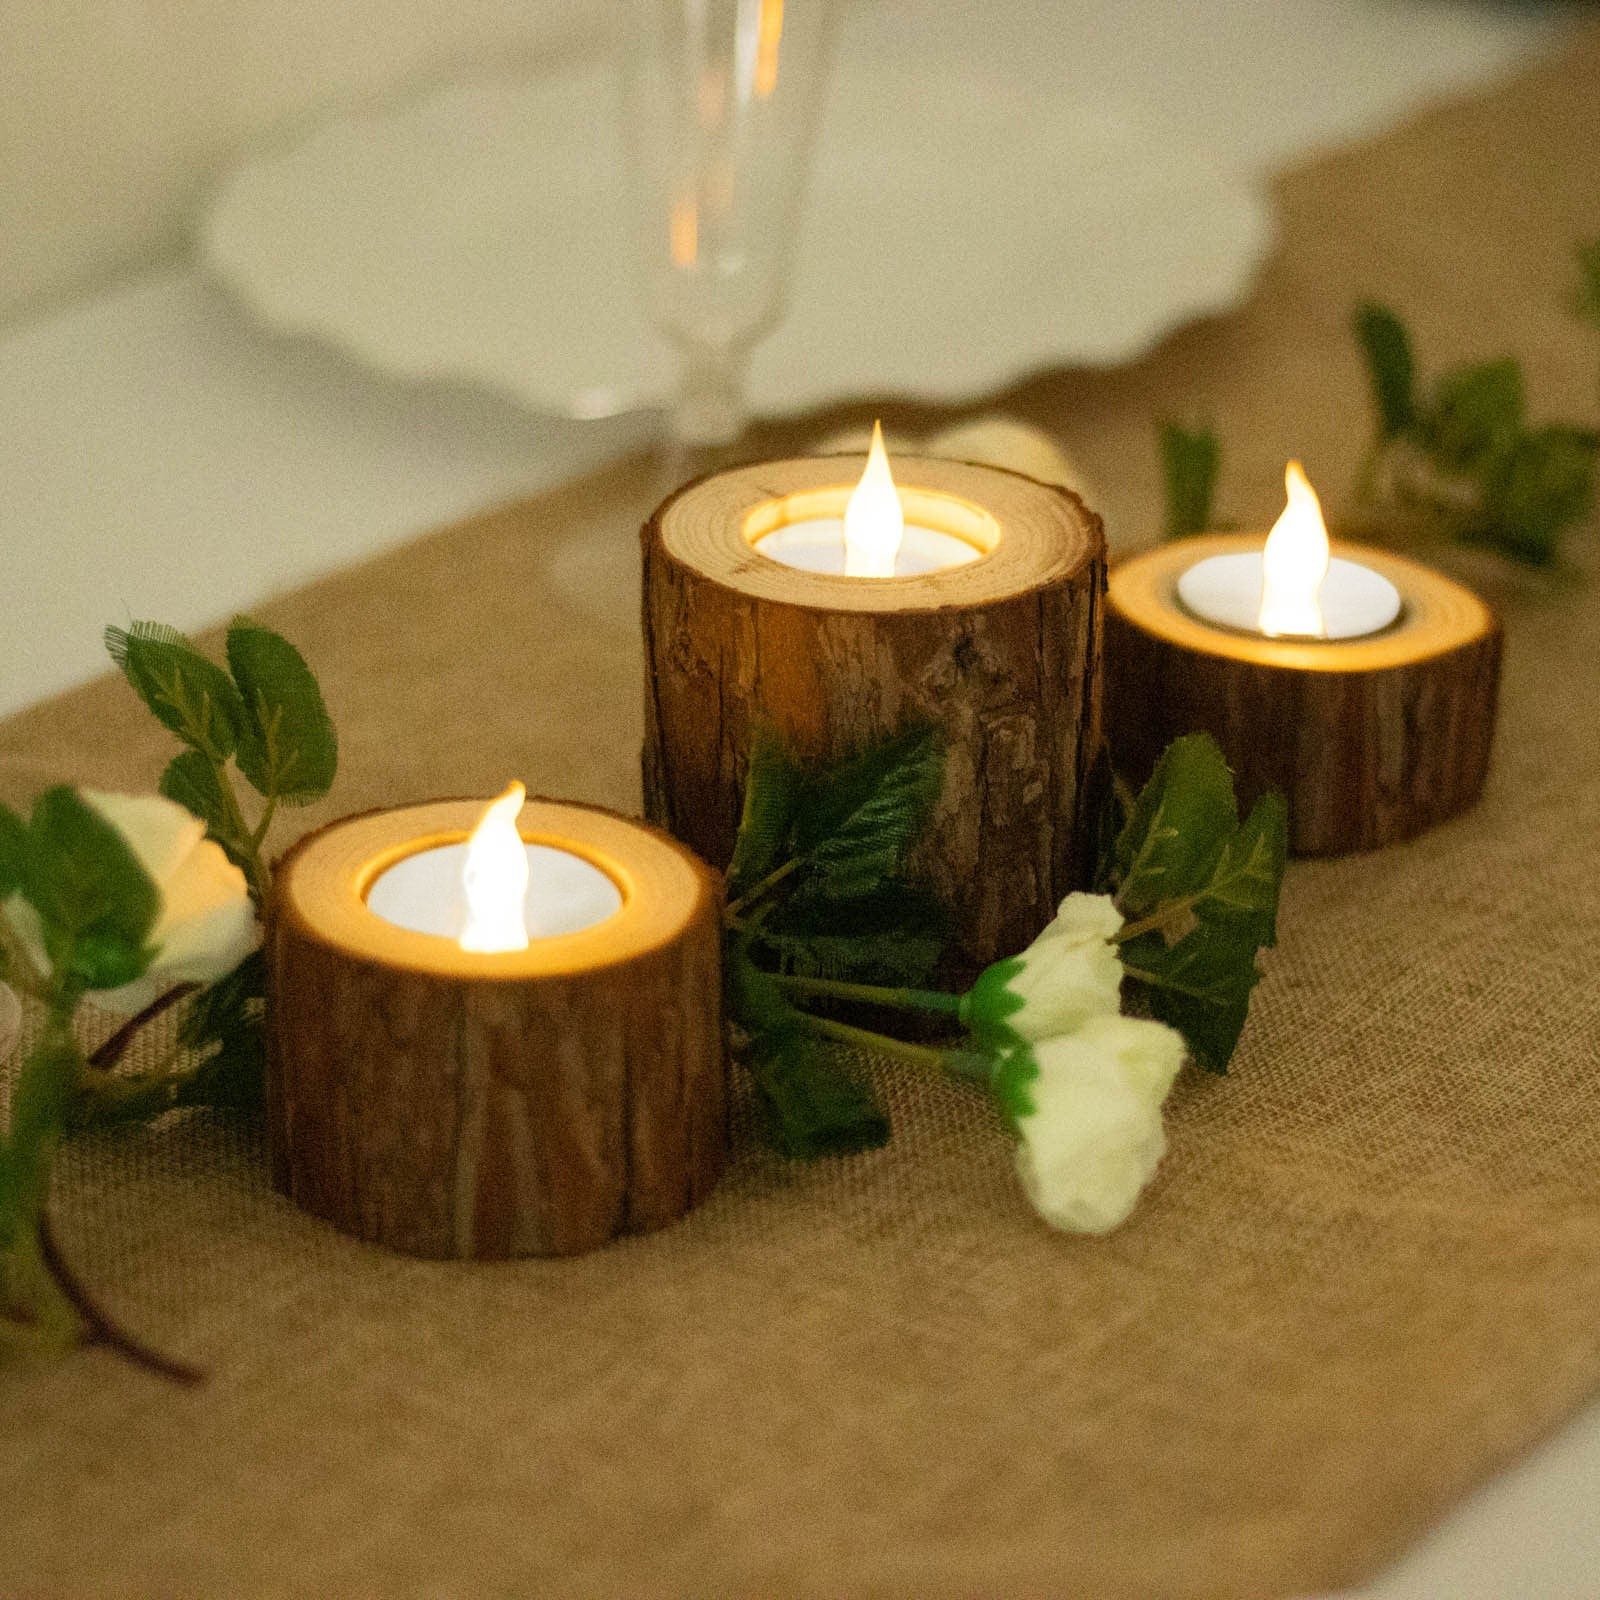 3 Assorted Round Natural Wood Slice Tea Light Candle Holders